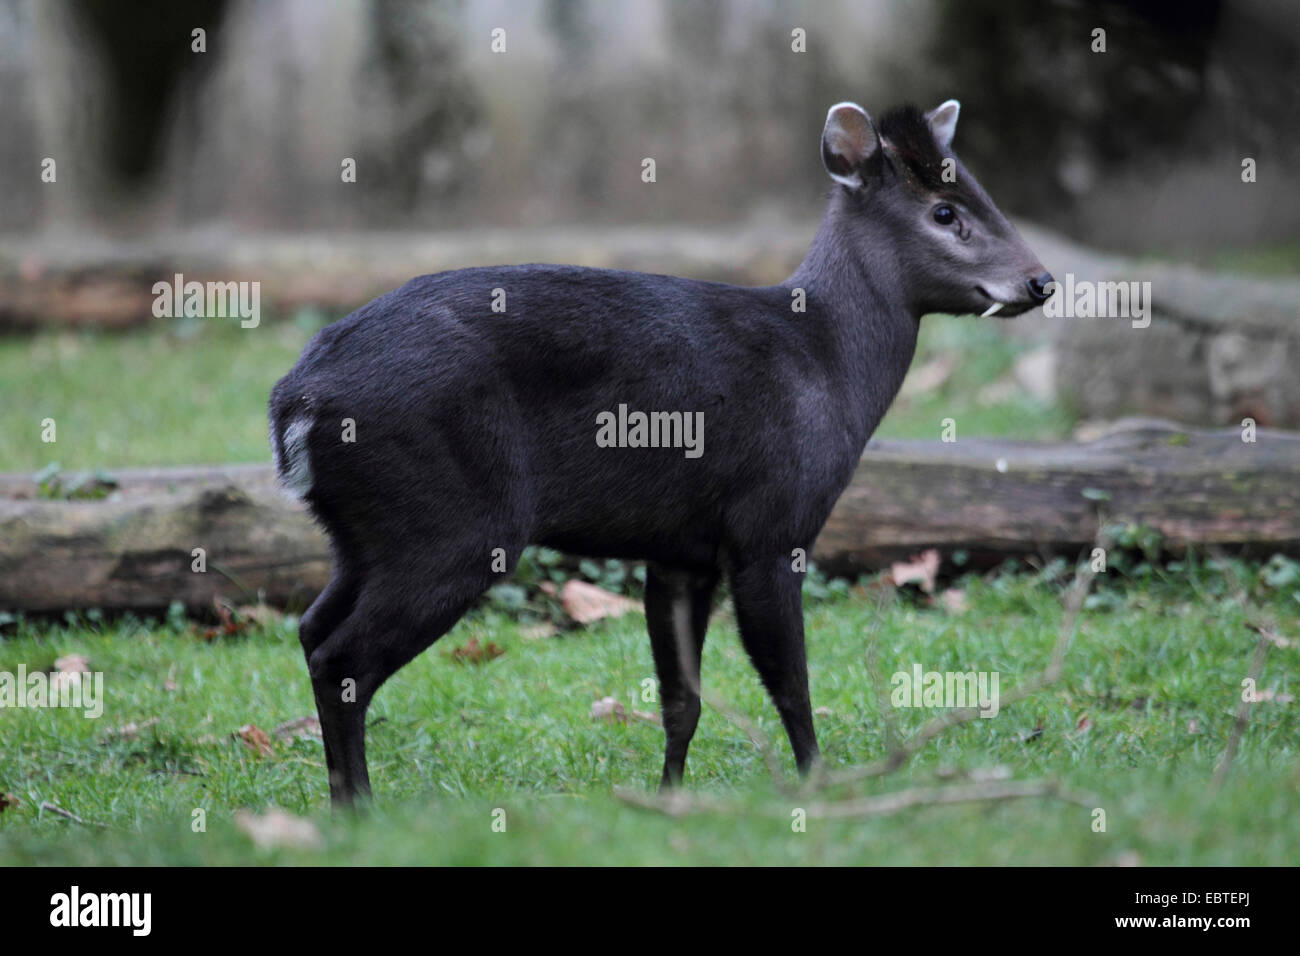 tufted deer (Elaphodus cephalophus), standing on lawn in front of dead wood Stock Photo